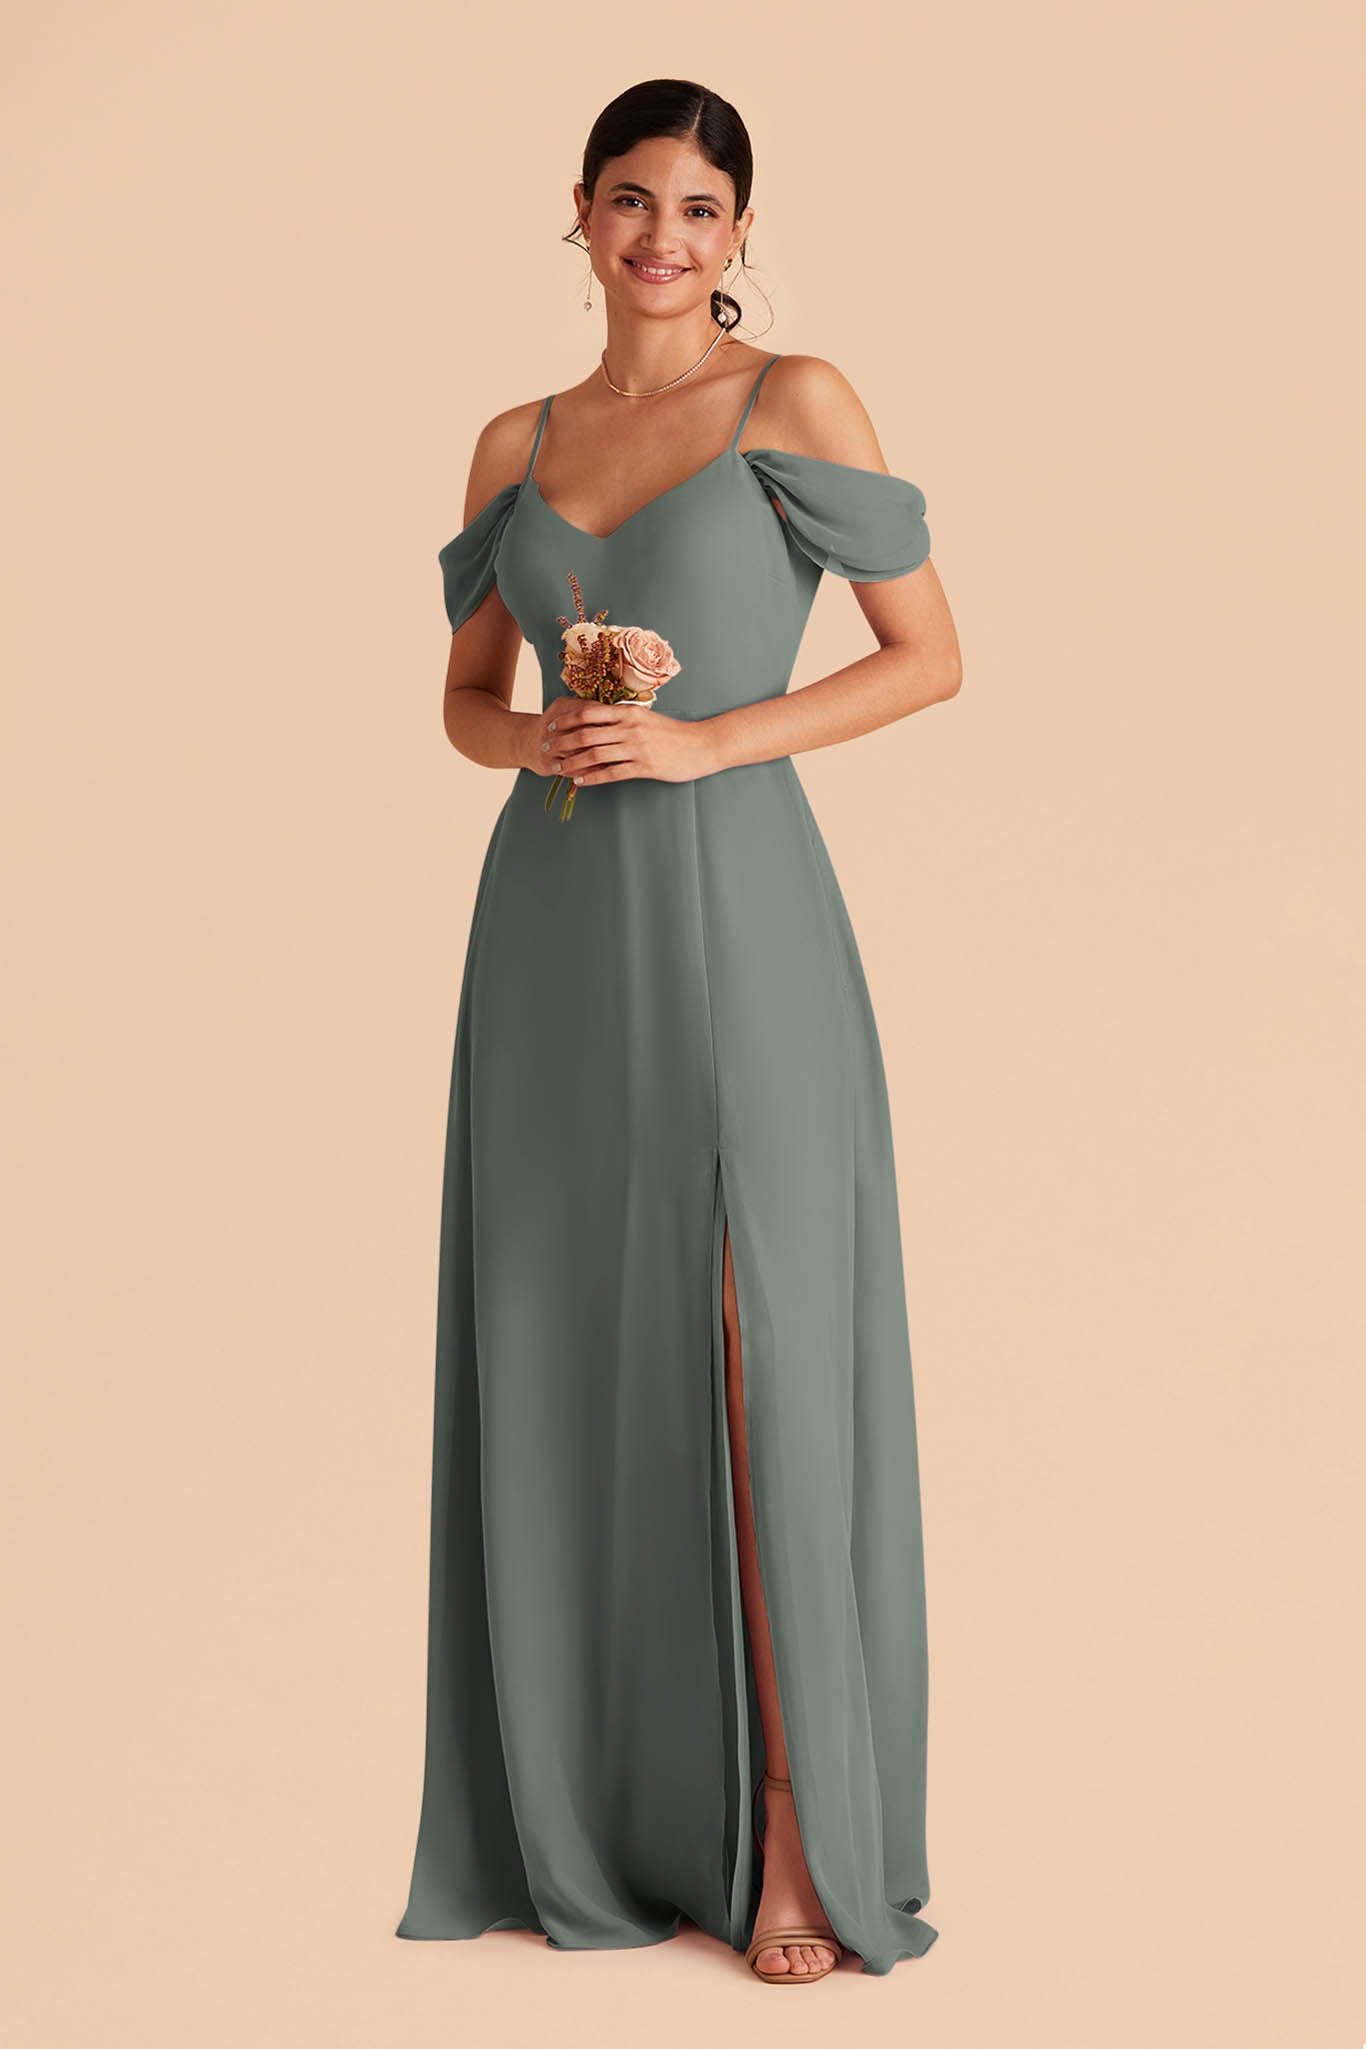 Devin convertible bridesmaids dress in sea glass green chiffon by Birdy Grey, front view